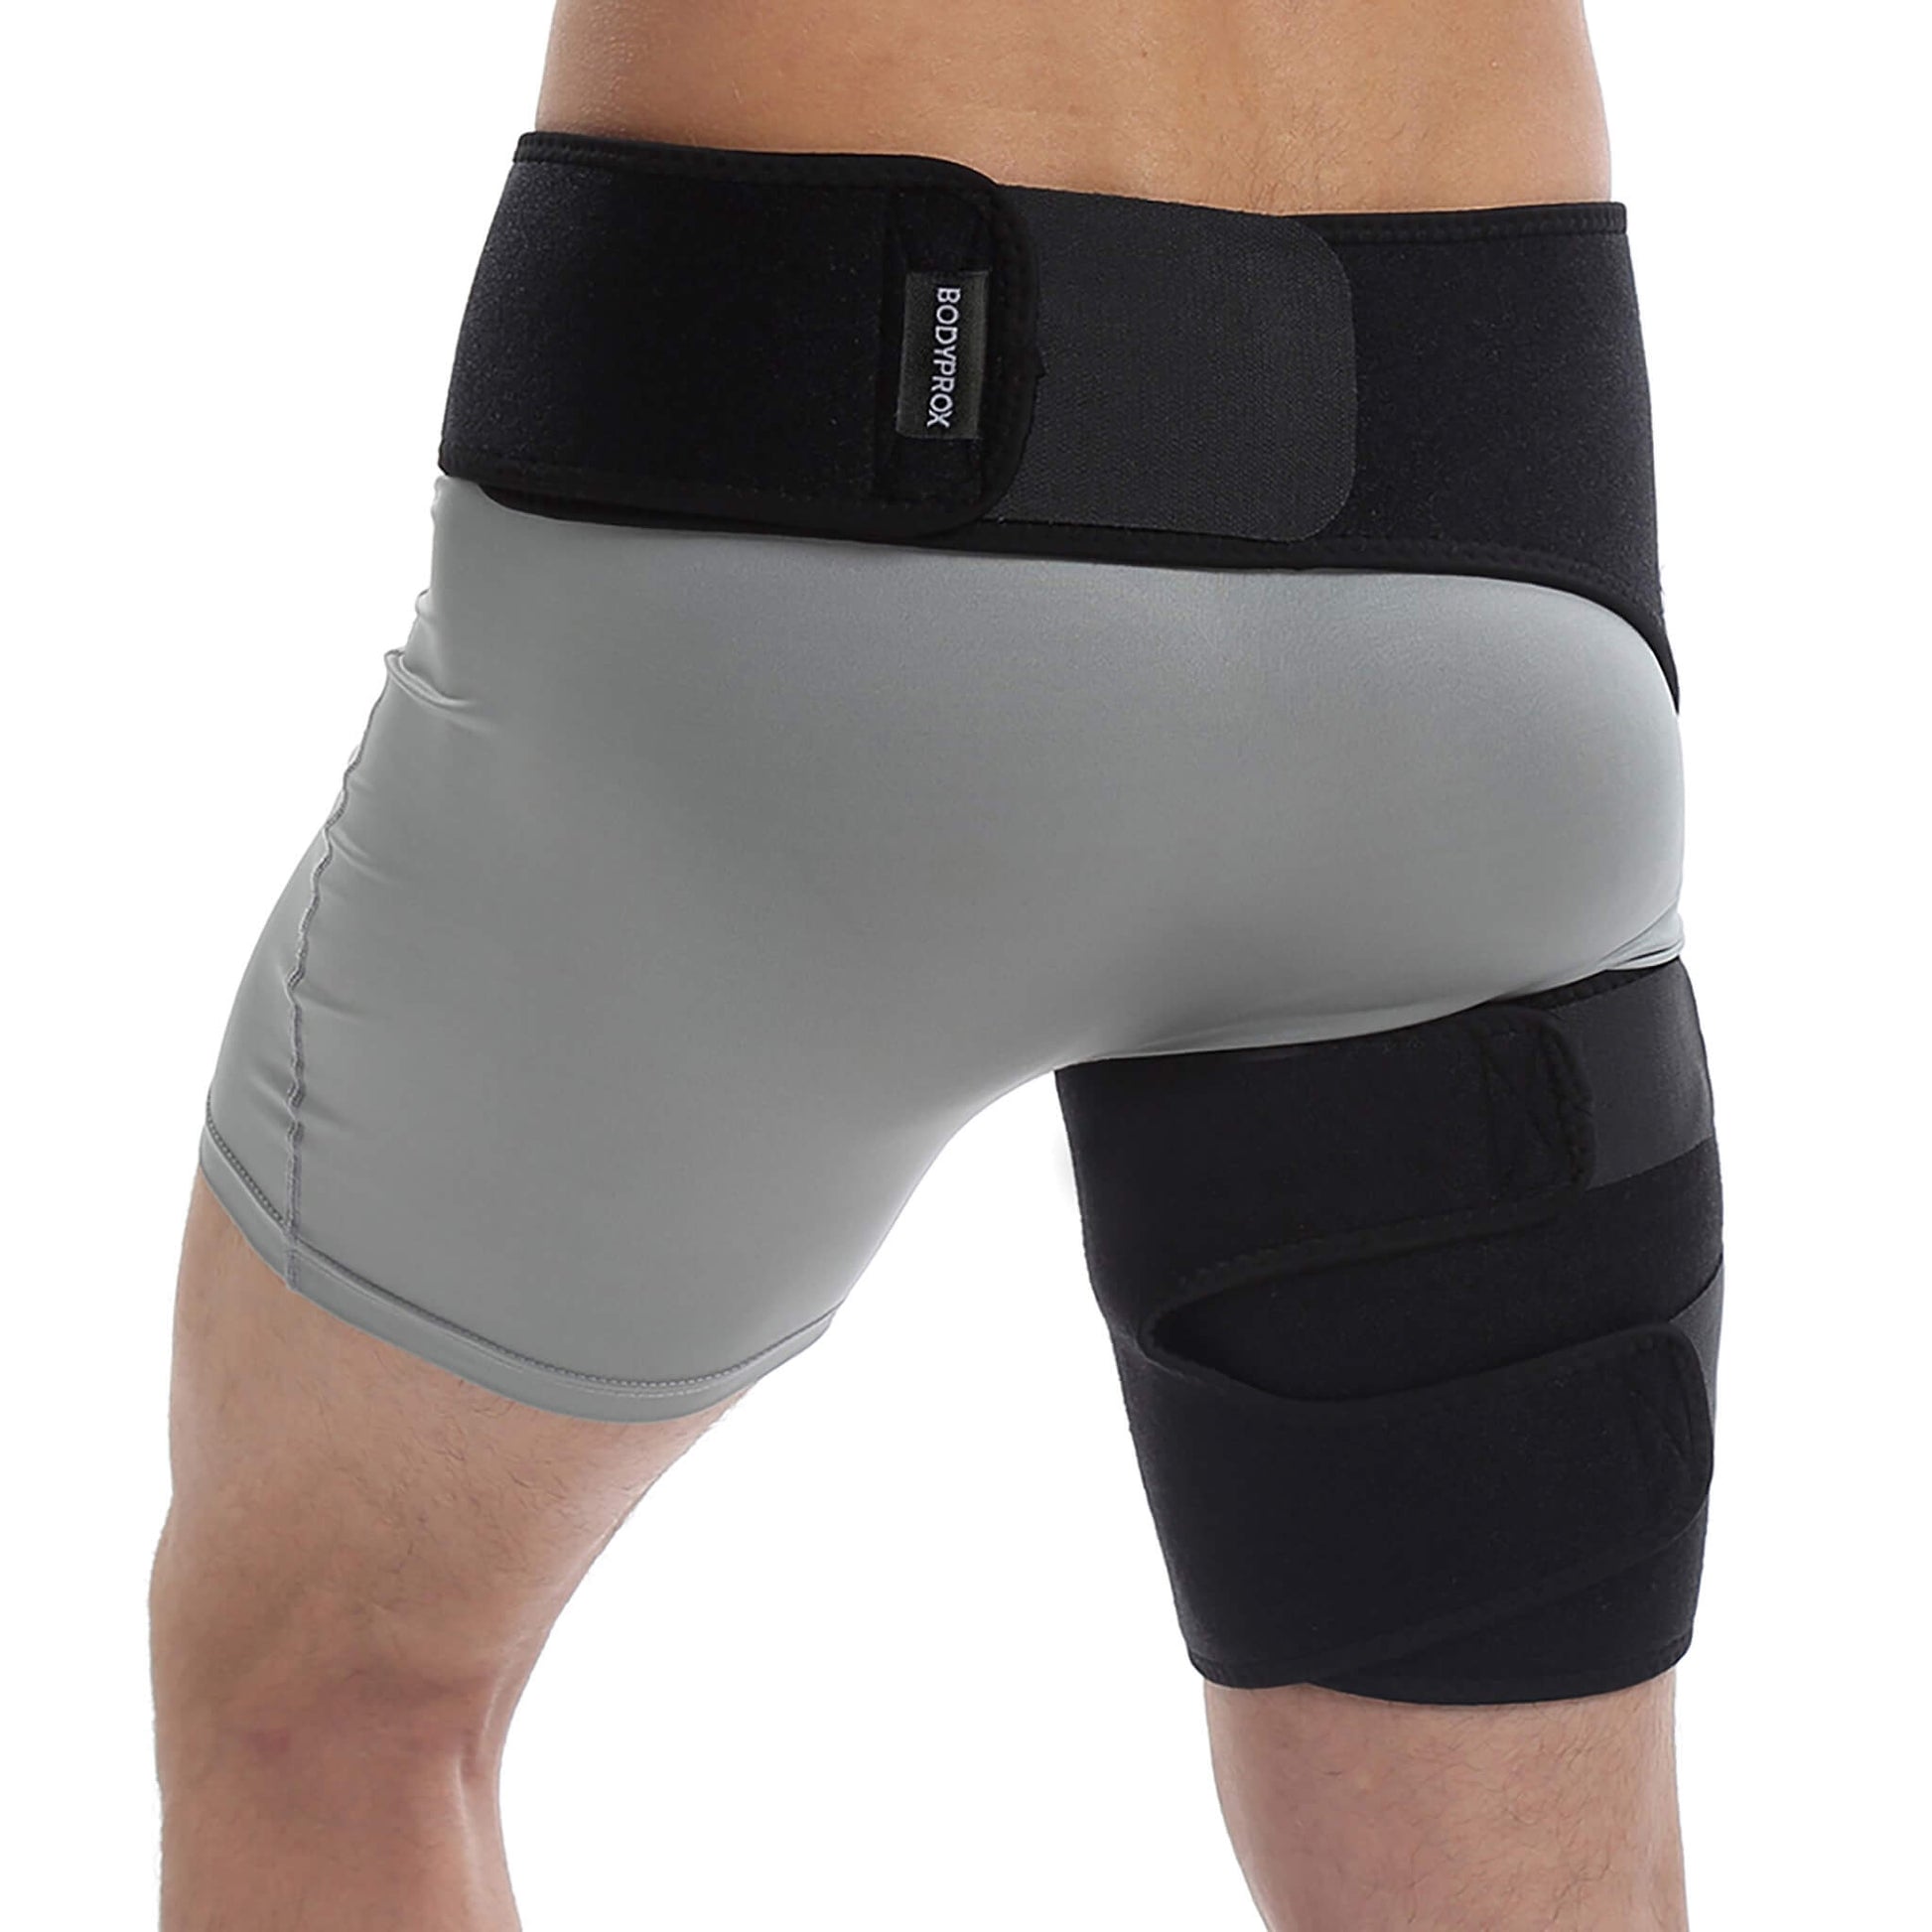 Groin Wrap, Adjustable Support for Hip, Groin, Hamstring, Thigh